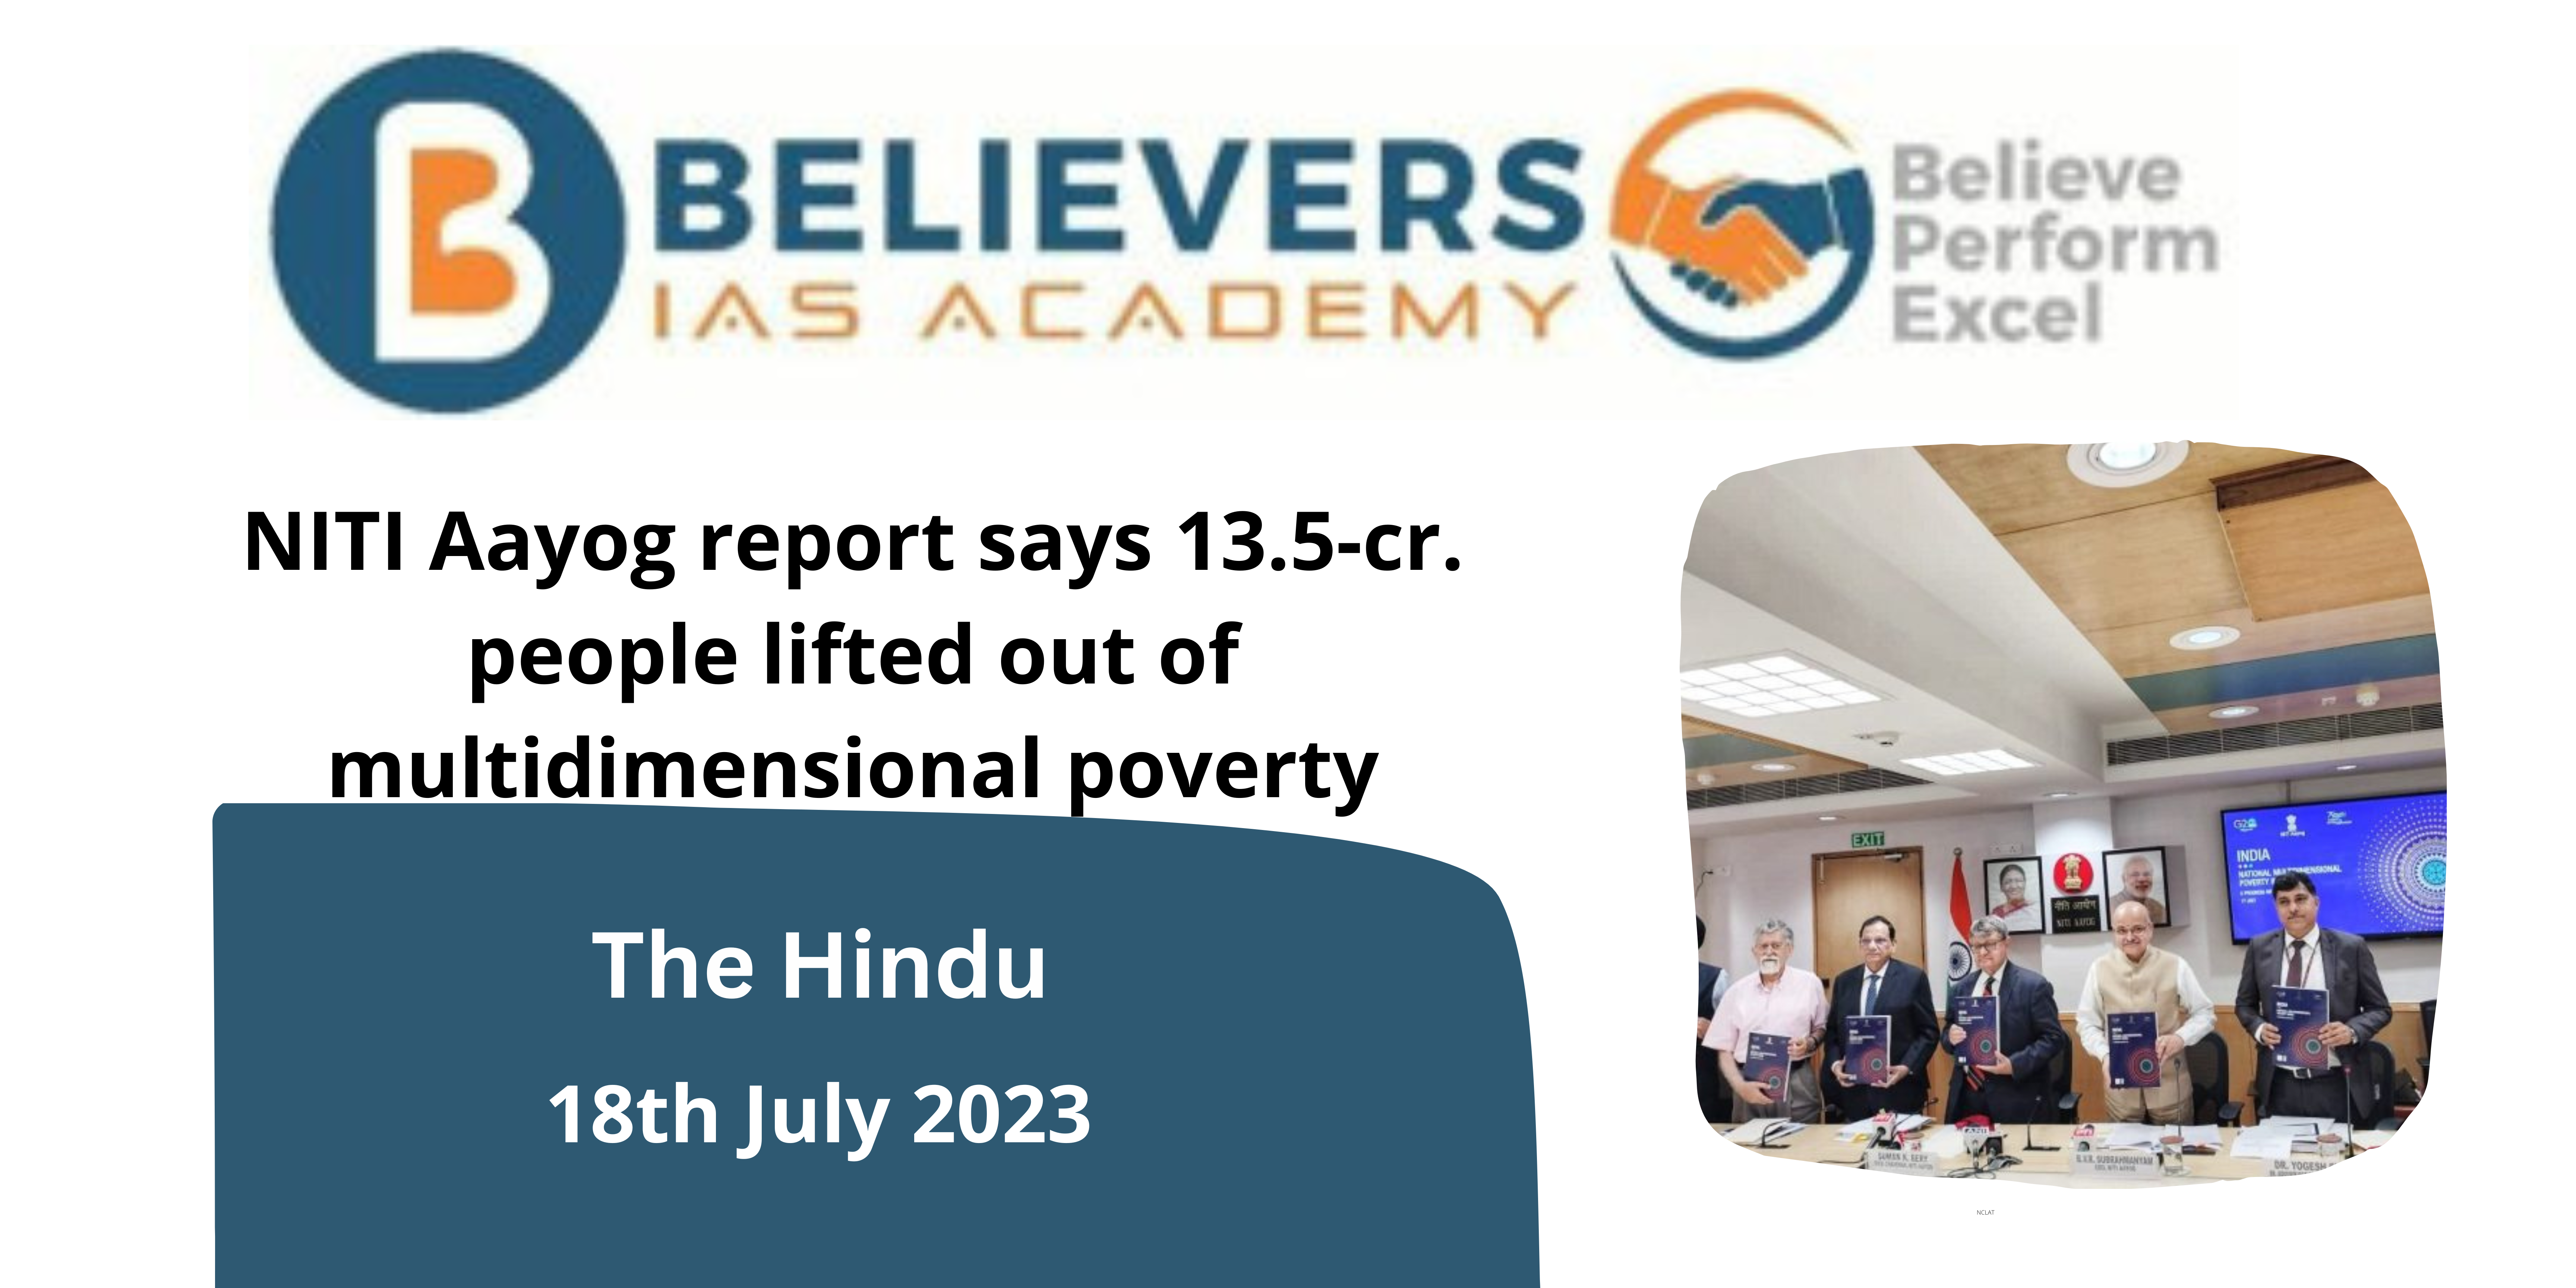 NITI Aayog report says 13.5-cr. people lifted out of multidimensional poverty